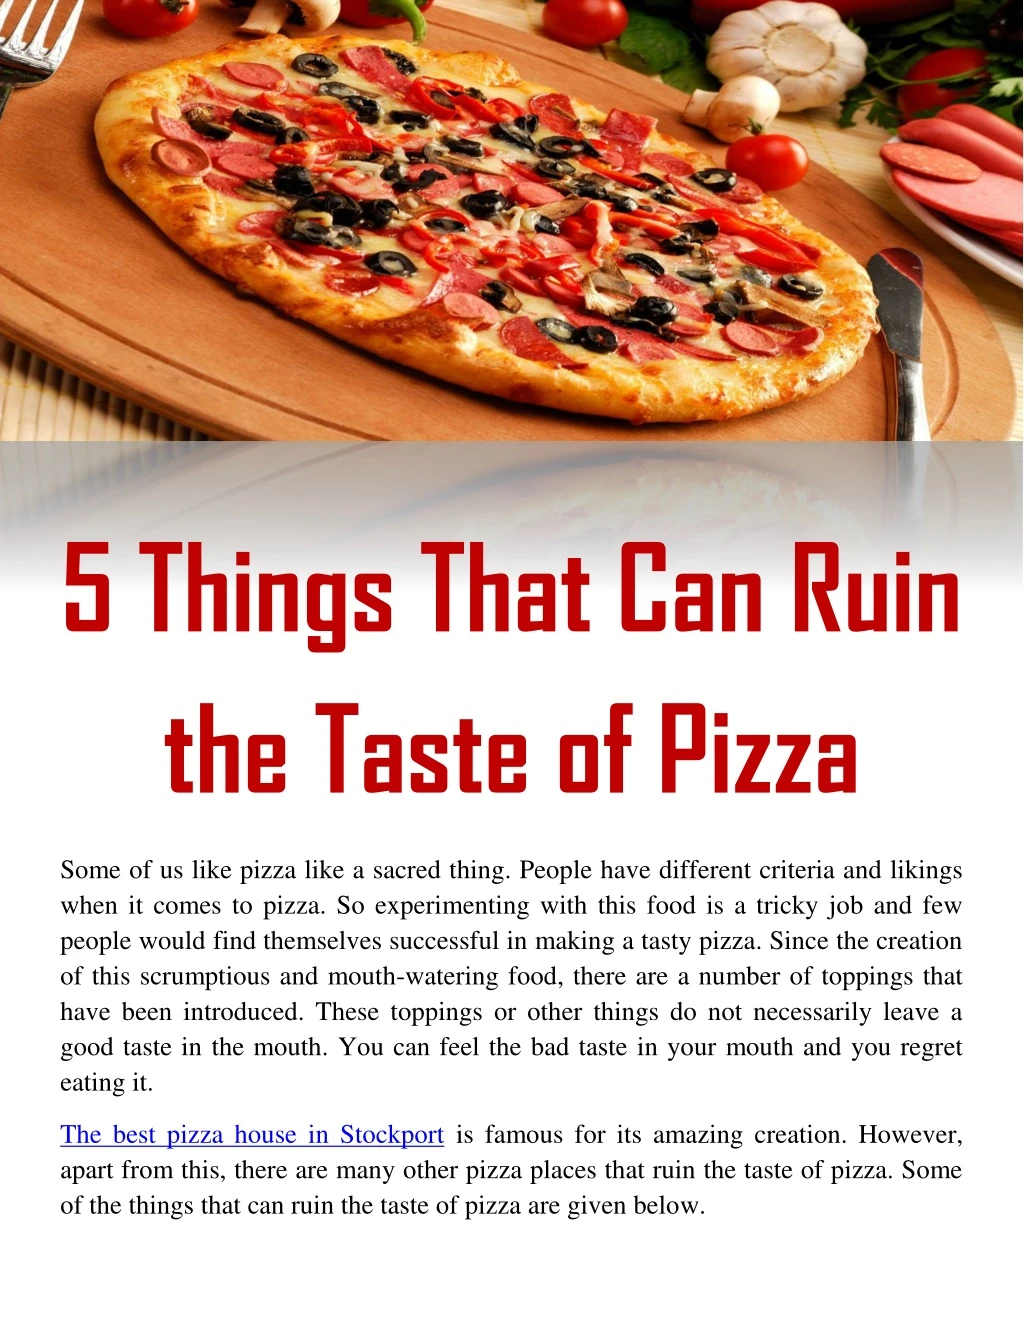 5 things that can ruin the taste of pizza